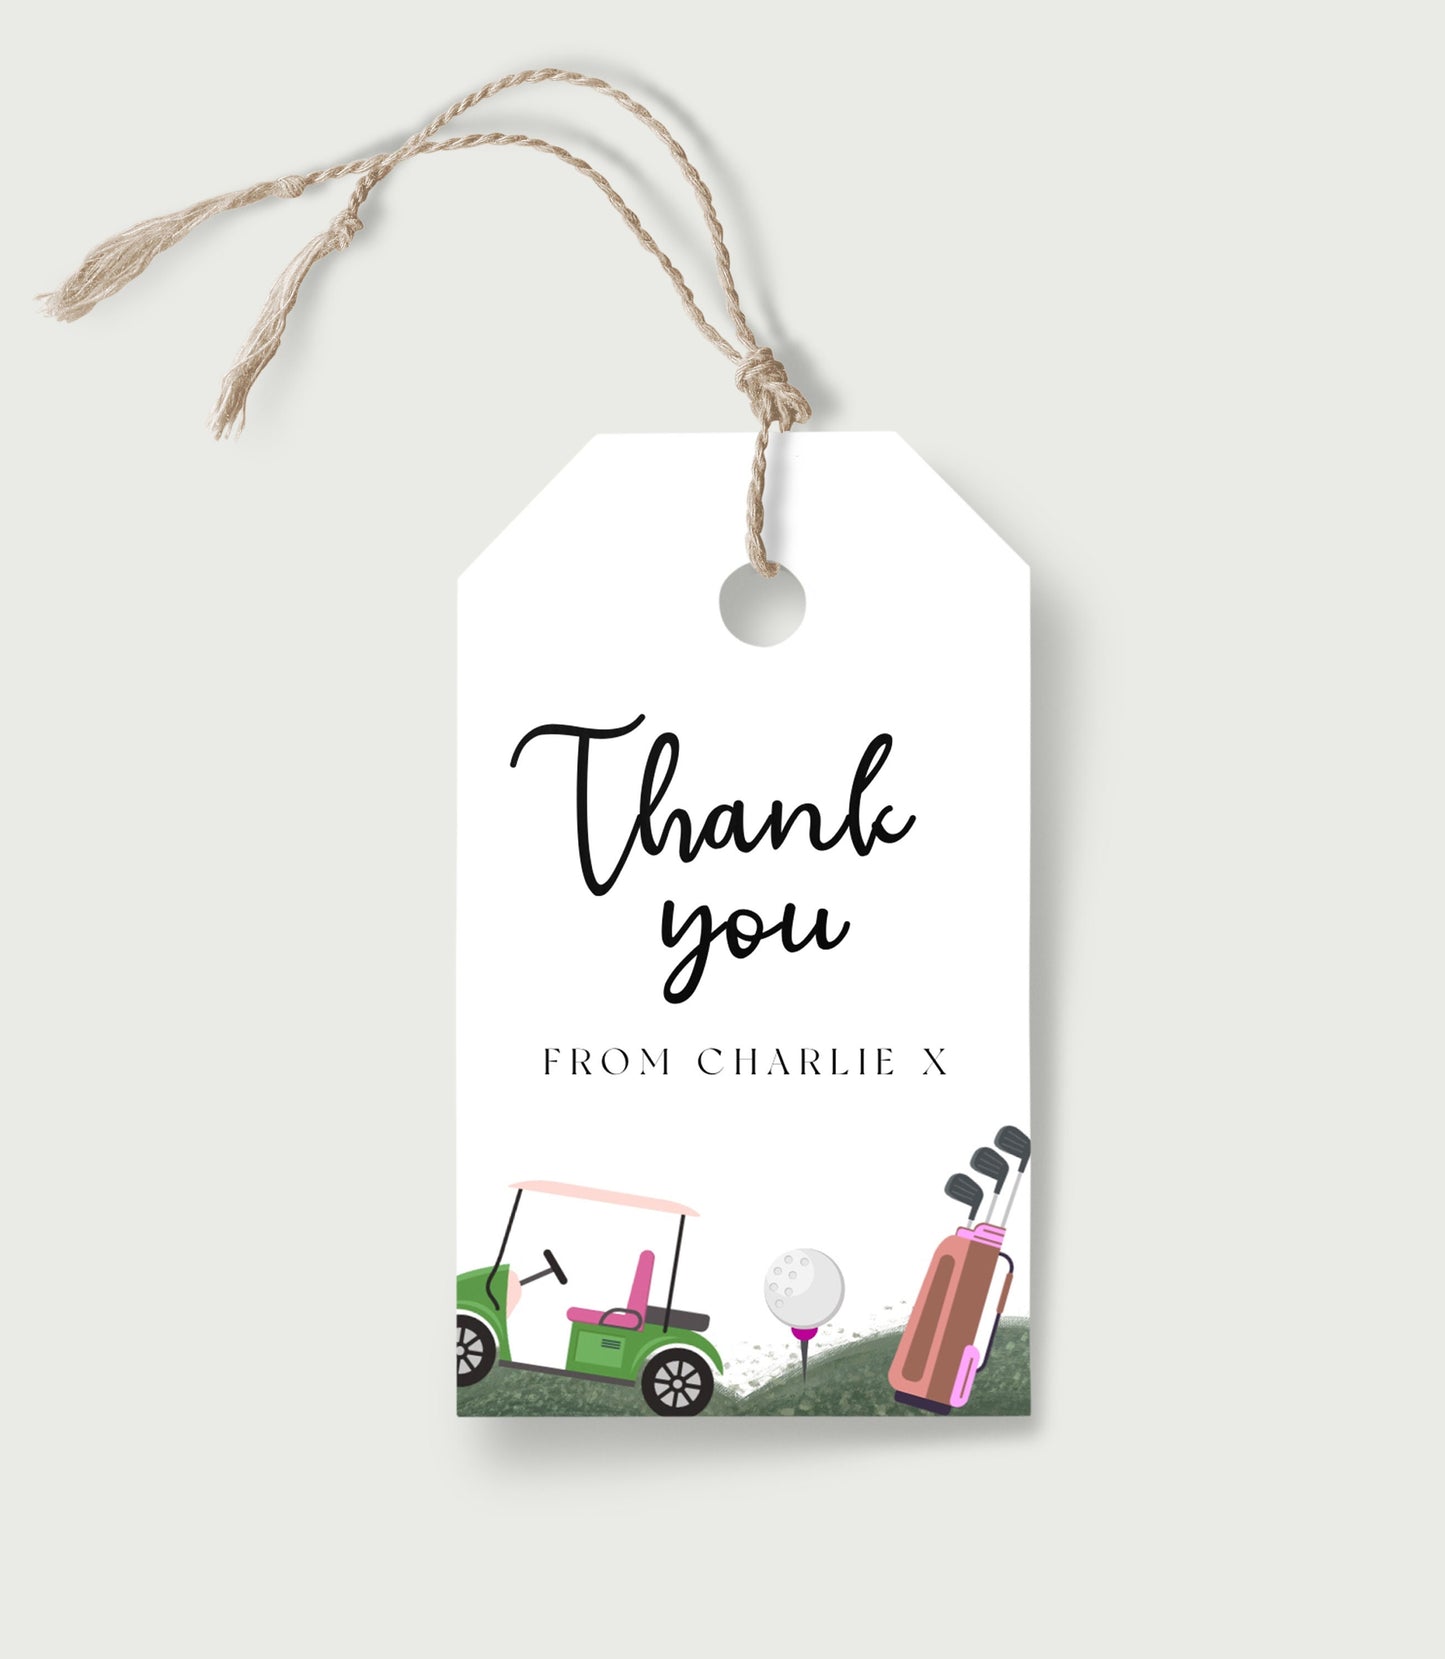 Editable Golf Favor Tags-Golf Birthday Party Girls, Golf Thank You Tag, Golfing Birthday, Golf Gift Tag Pink, Party Decor,  Instant Download